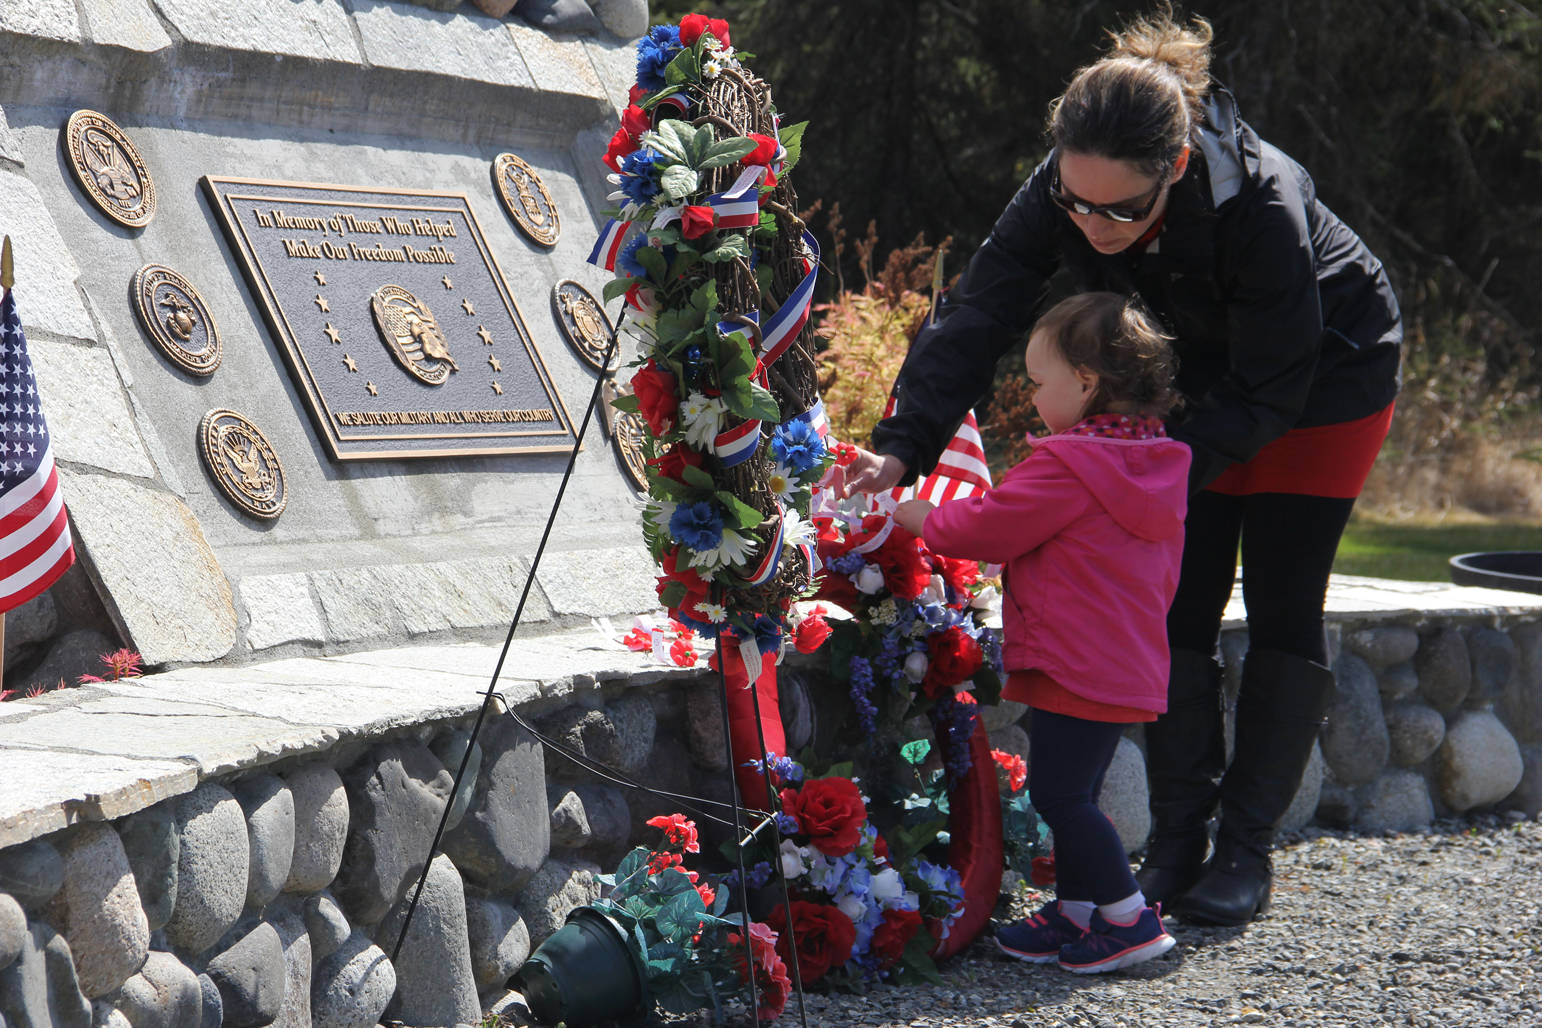 Jane Reynolds teaches 22-month-old Sara to remember the fallen.